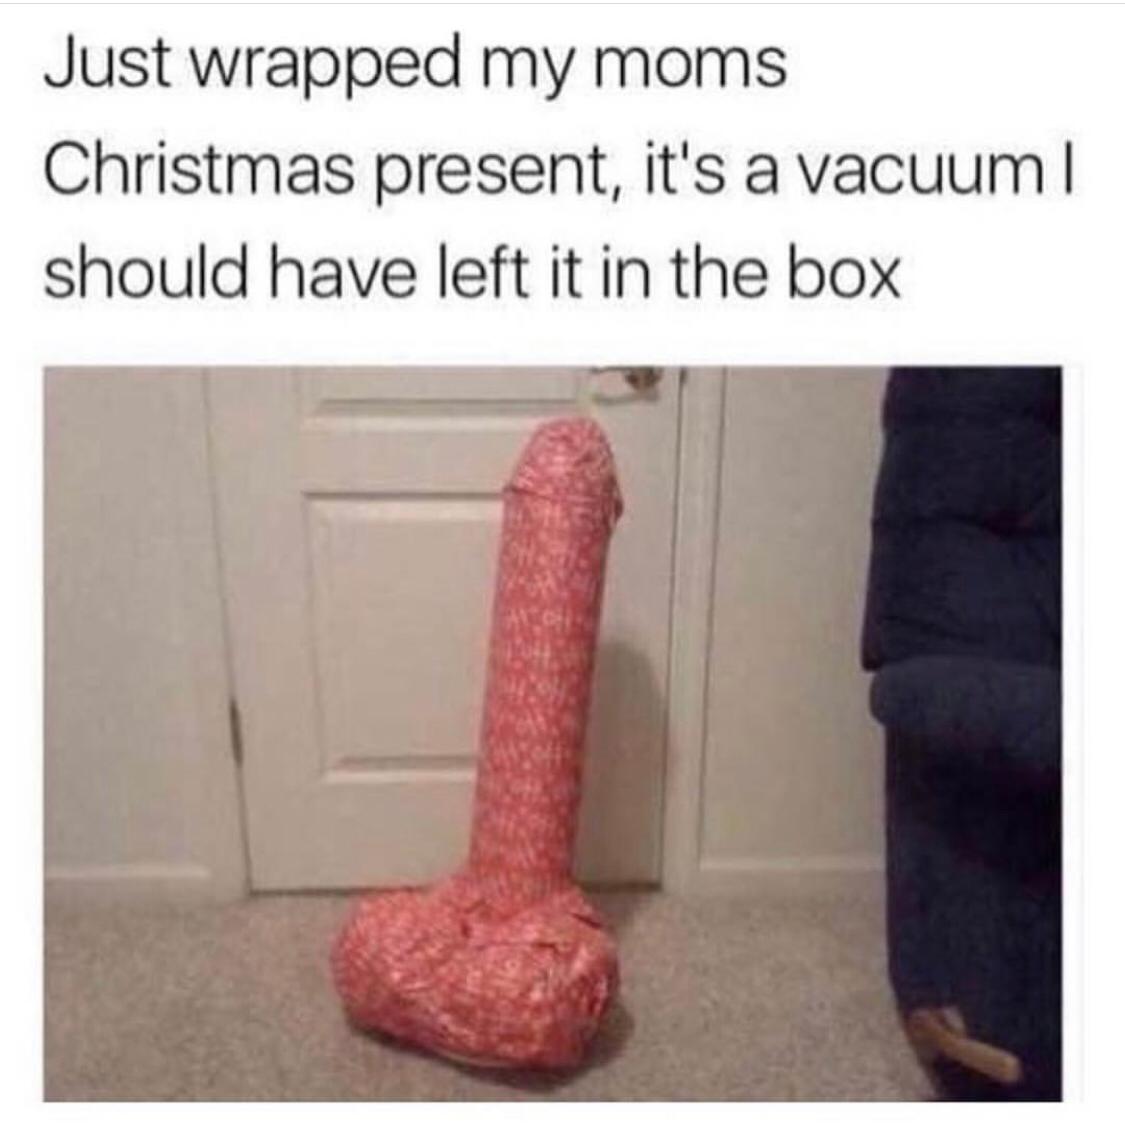 penis shaped gift wrapped - Just wrapped my moms Christmas present, it's a vacuum | should have left it in the box